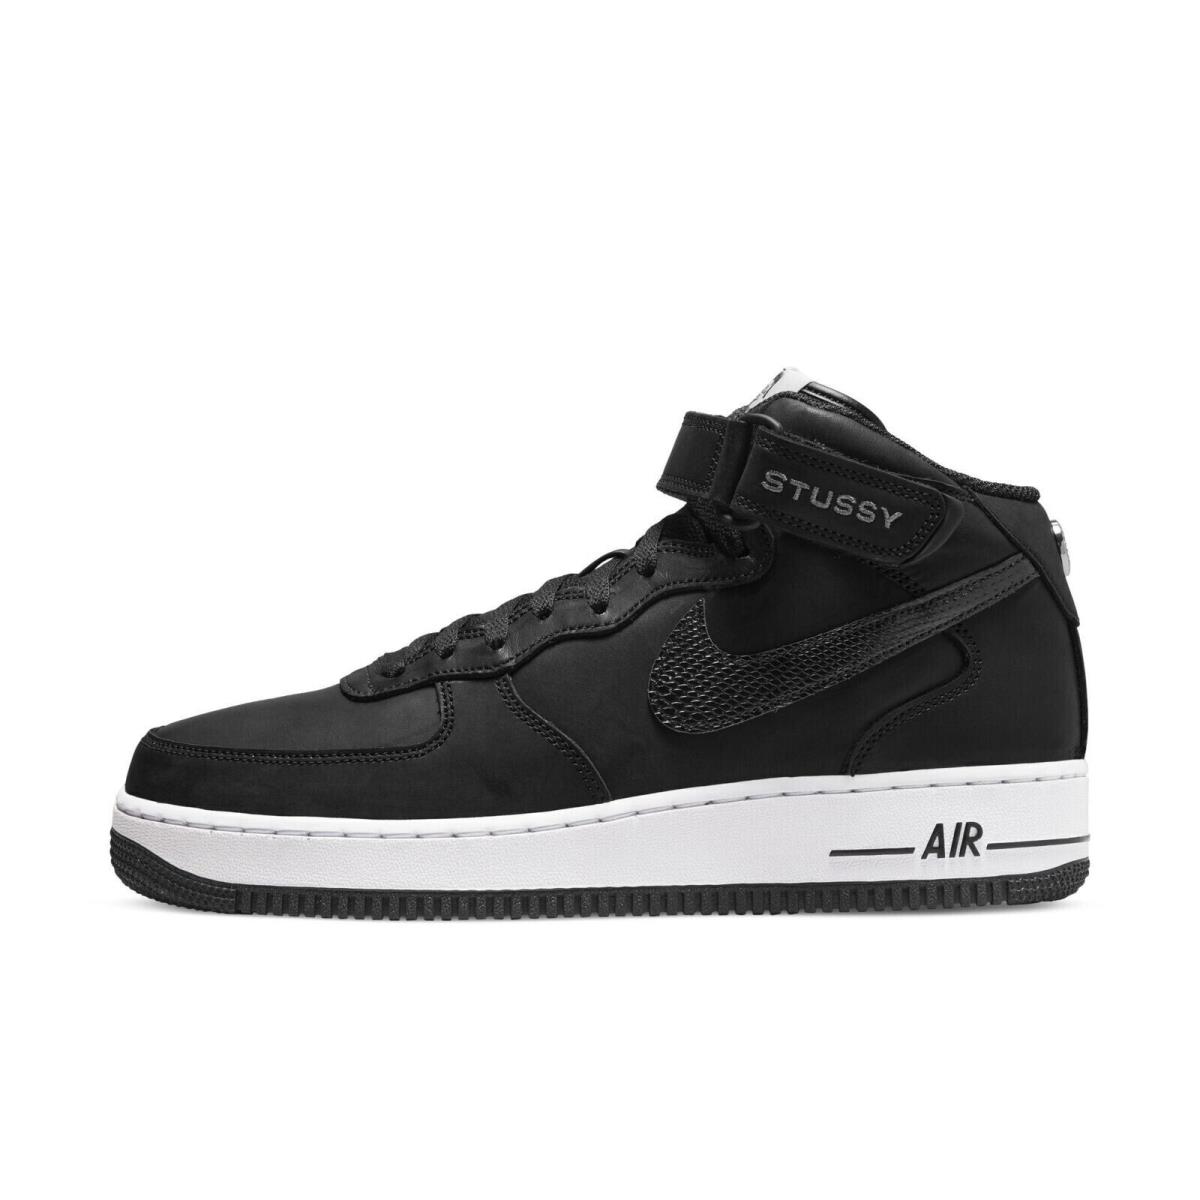 Nike x Stussy Air Force 1 Mid Leather Shoes Black/white Sneakers Men`s Size 11.5